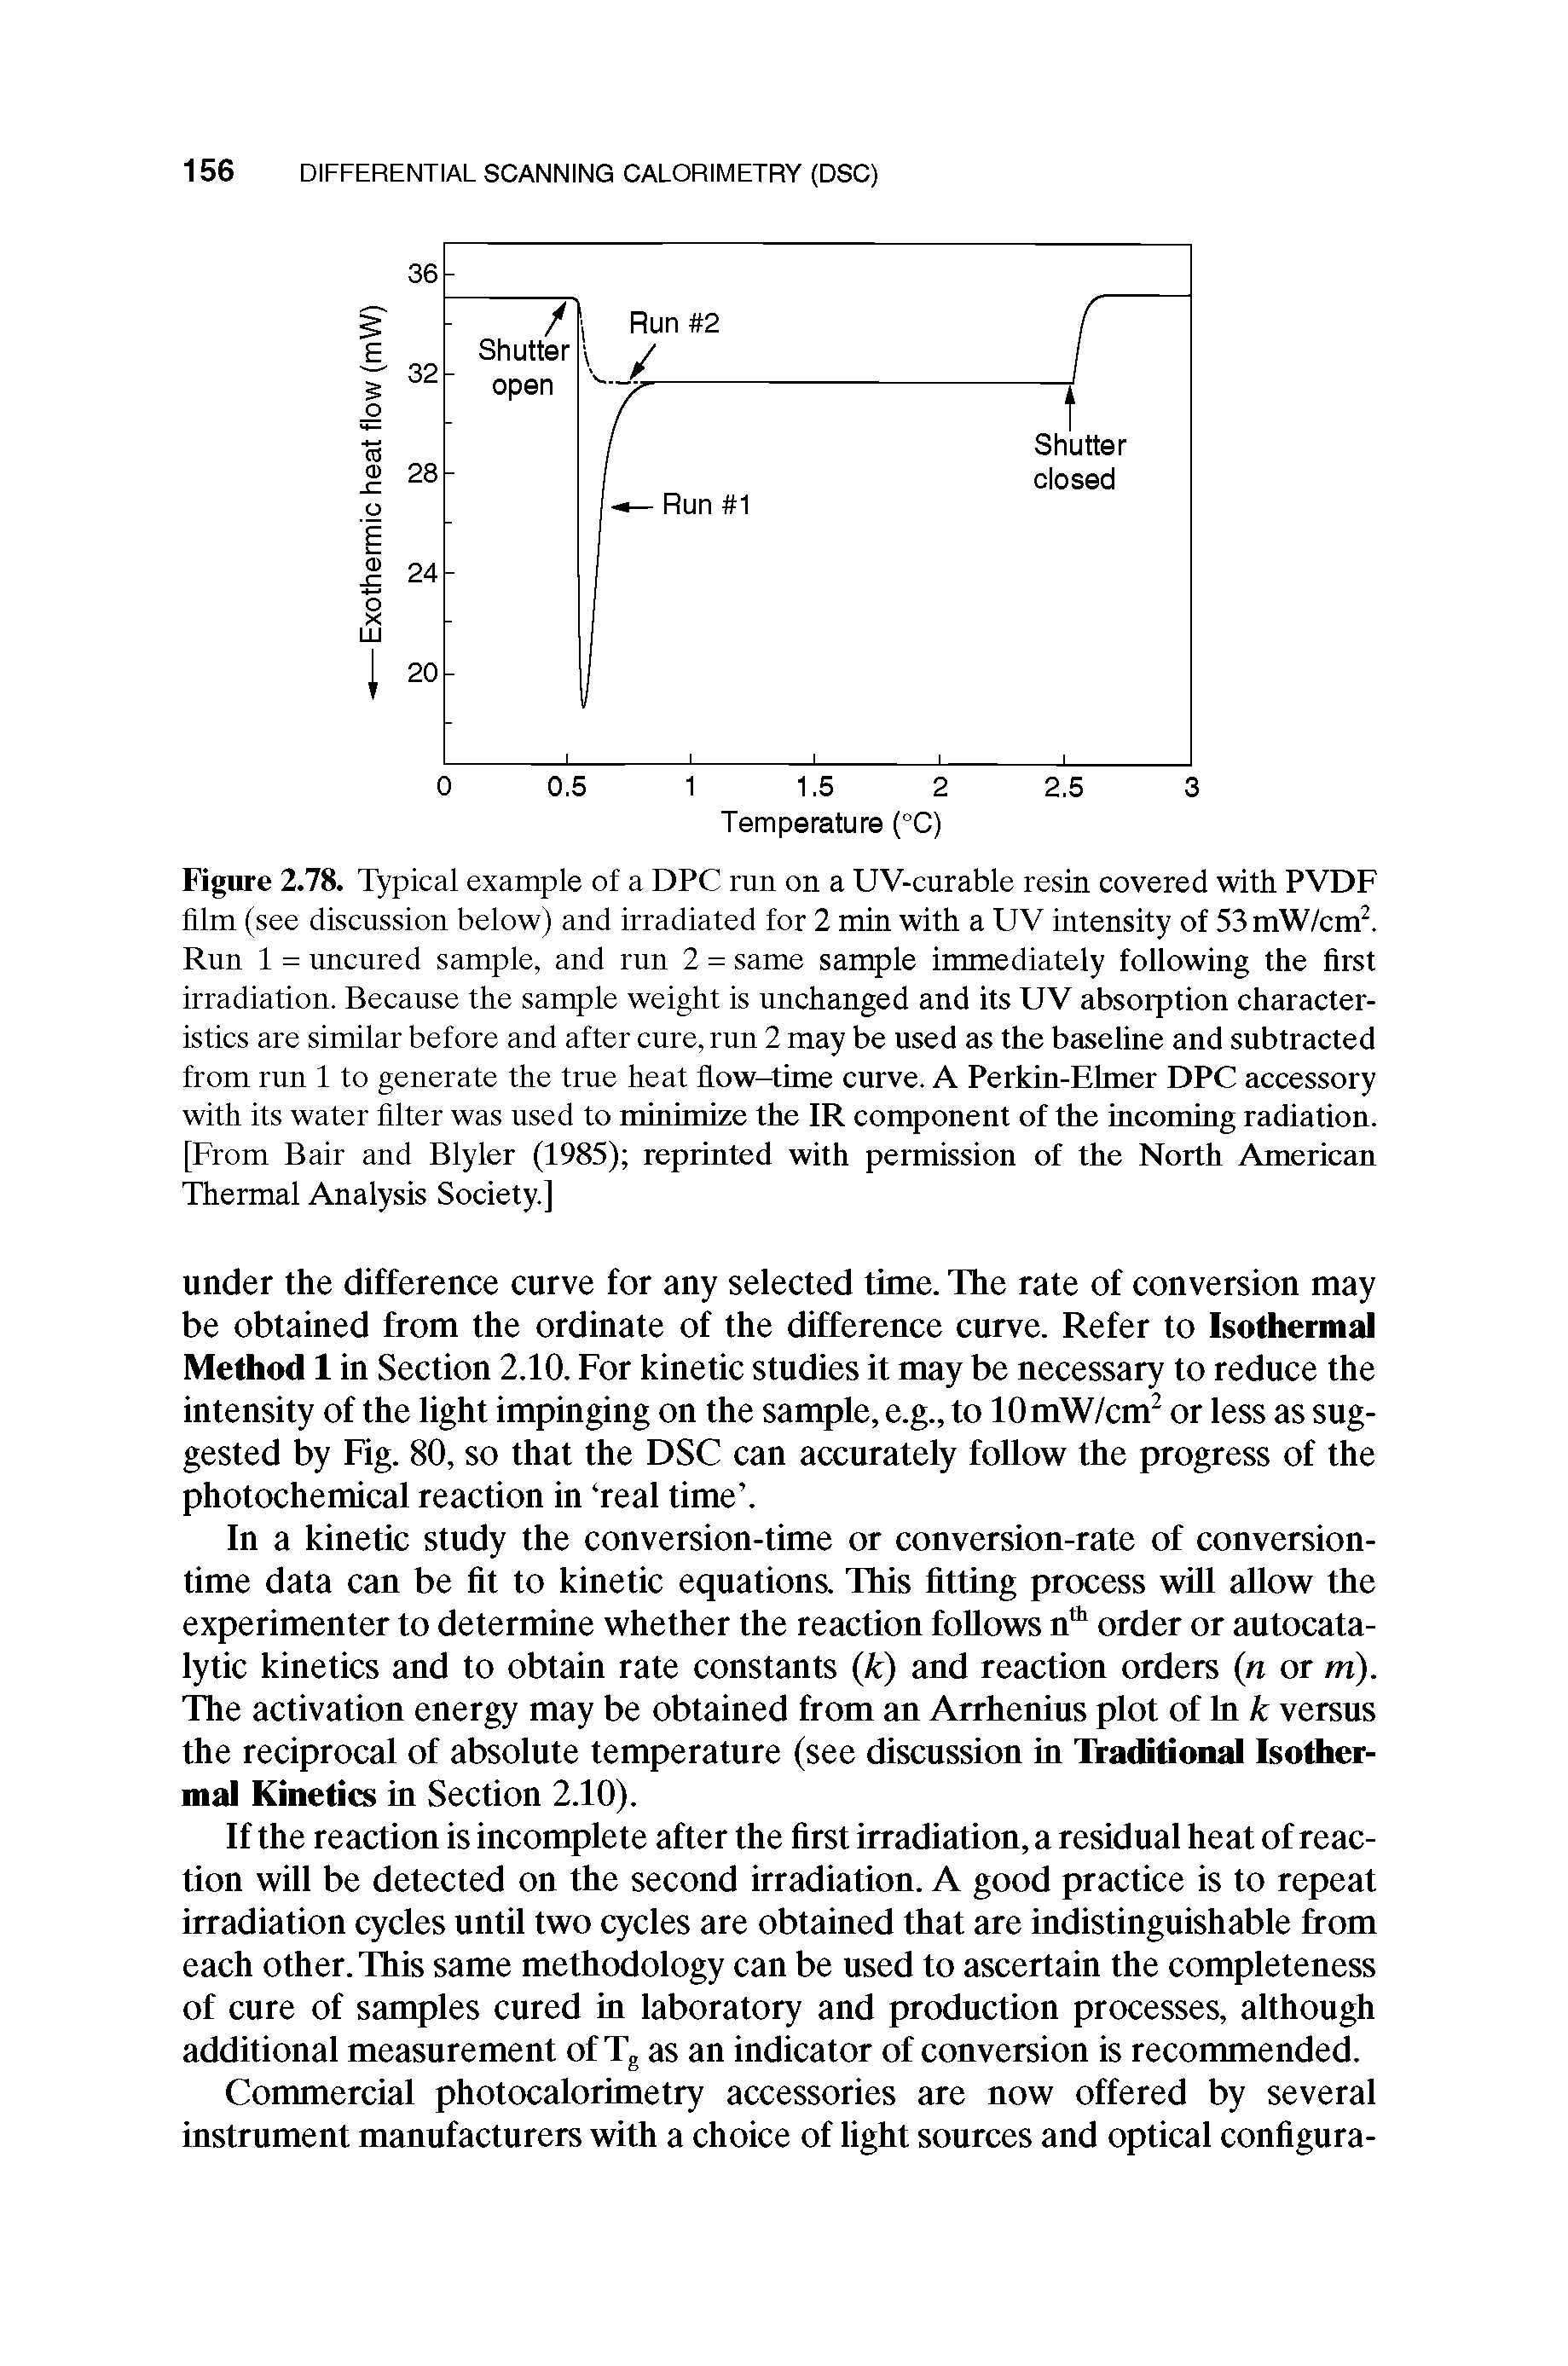 Figure 2.78. Typical example of a DPC ran on a UV-curable resin covered with PVDF film (see discussion below) and irradiated for 2 min with a UV intensity of 53 mW/cm. Run 1 = uncured sample, and run 2 = same sample immediately following the first irradiation. Because the sample weight is unchanged and its UV absorption characteristics are similar before and after cure, run 2 may be used as the baseline and subtracted from run 1 to generate the true heat flow-time curve. A Perkin-Ehner DPC accessory with its water filter was used to minimize the IR component of the incoming radiation. [From Bair and Blyler (1985) reprinted with permission of the North American Thermal Analysis Society]...